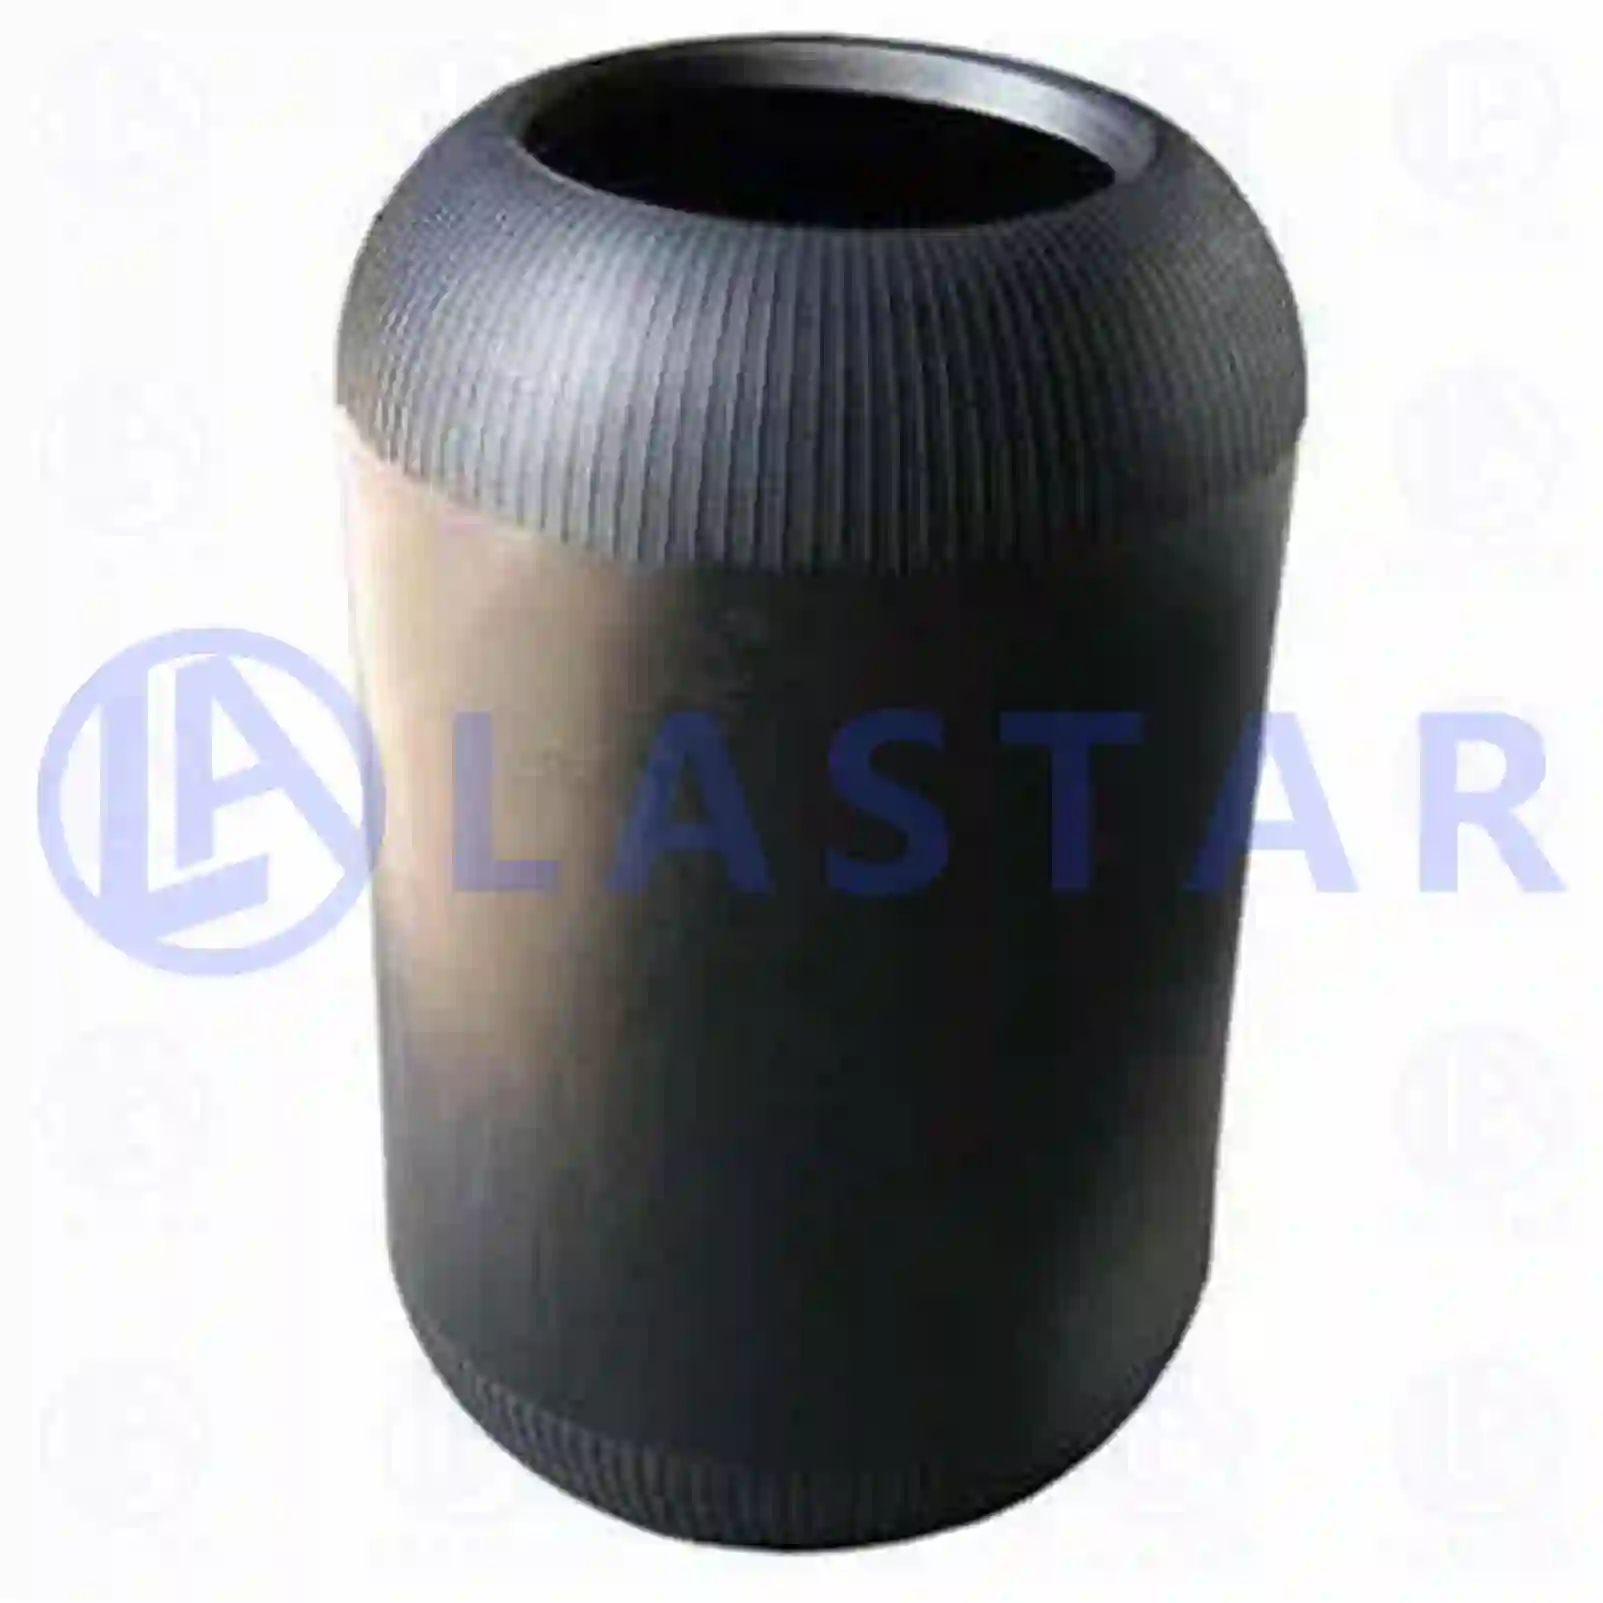 Air spring, without piston, 77727647, 00474733, 02498667, 04746733, 41822247, 4746733, 5001829866, 36436010005, 88436010200, 90731120144, 90831120144, N1011016345, 4103270001, 6133270201, 100112250, 5001829866, MLF7000, 750208, 4731012000, 4731031000, 4731042000, 4771427000, 4771440000, 624319670, 624319690, 624319700, 1137882, 1137888, 3159253, ZG40808-0008 ||  77727647 Lastar Spare Part | Truck Spare Parts, Auotomotive Spare Parts Air spring, without piston, 77727647, 00474733, 02498667, 04746733, 41822247, 4746733, 5001829866, 36436010005, 88436010200, 90731120144, 90831120144, N1011016345, 4103270001, 6133270201, 100112250, 5001829866, MLF7000, 750208, 4731012000, 4731031000, 4731042000, 4771427000, 4771440000, 624319670, 624319690, 624319700, 1137882, 1137888, 3159253, ZG40808-0008 ||  77727647 Lastar Spare Part | Truck Spare Parts, Auotomotive Spare Parts